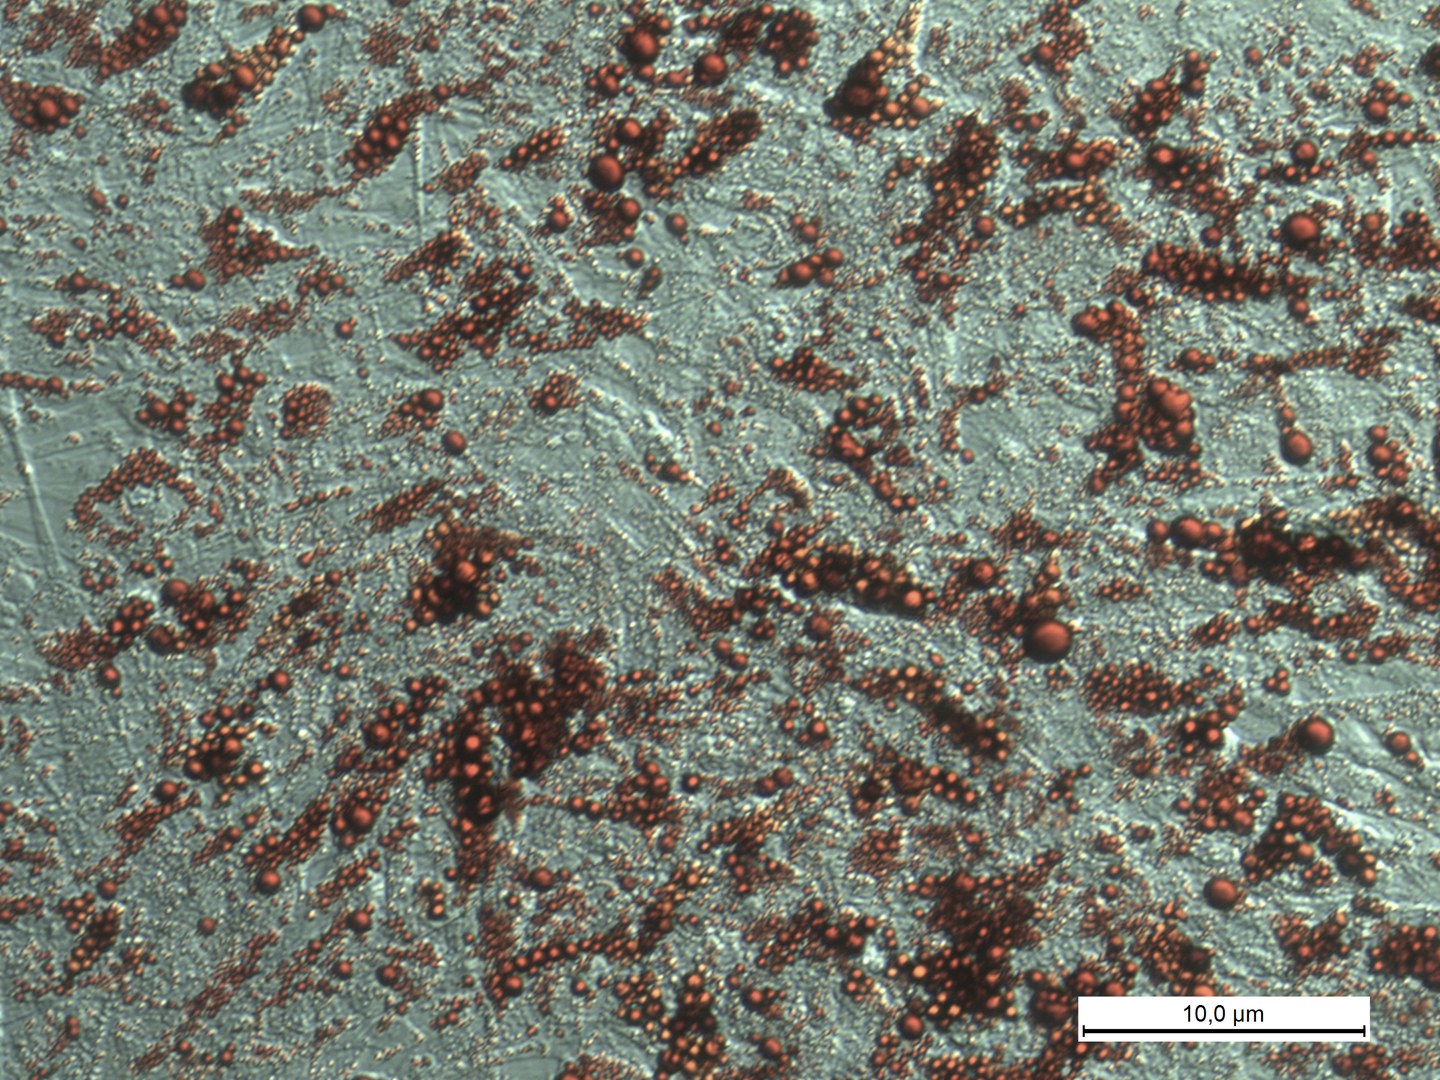 Human brown adipocytes, lipid stained red (RedO oil stain)